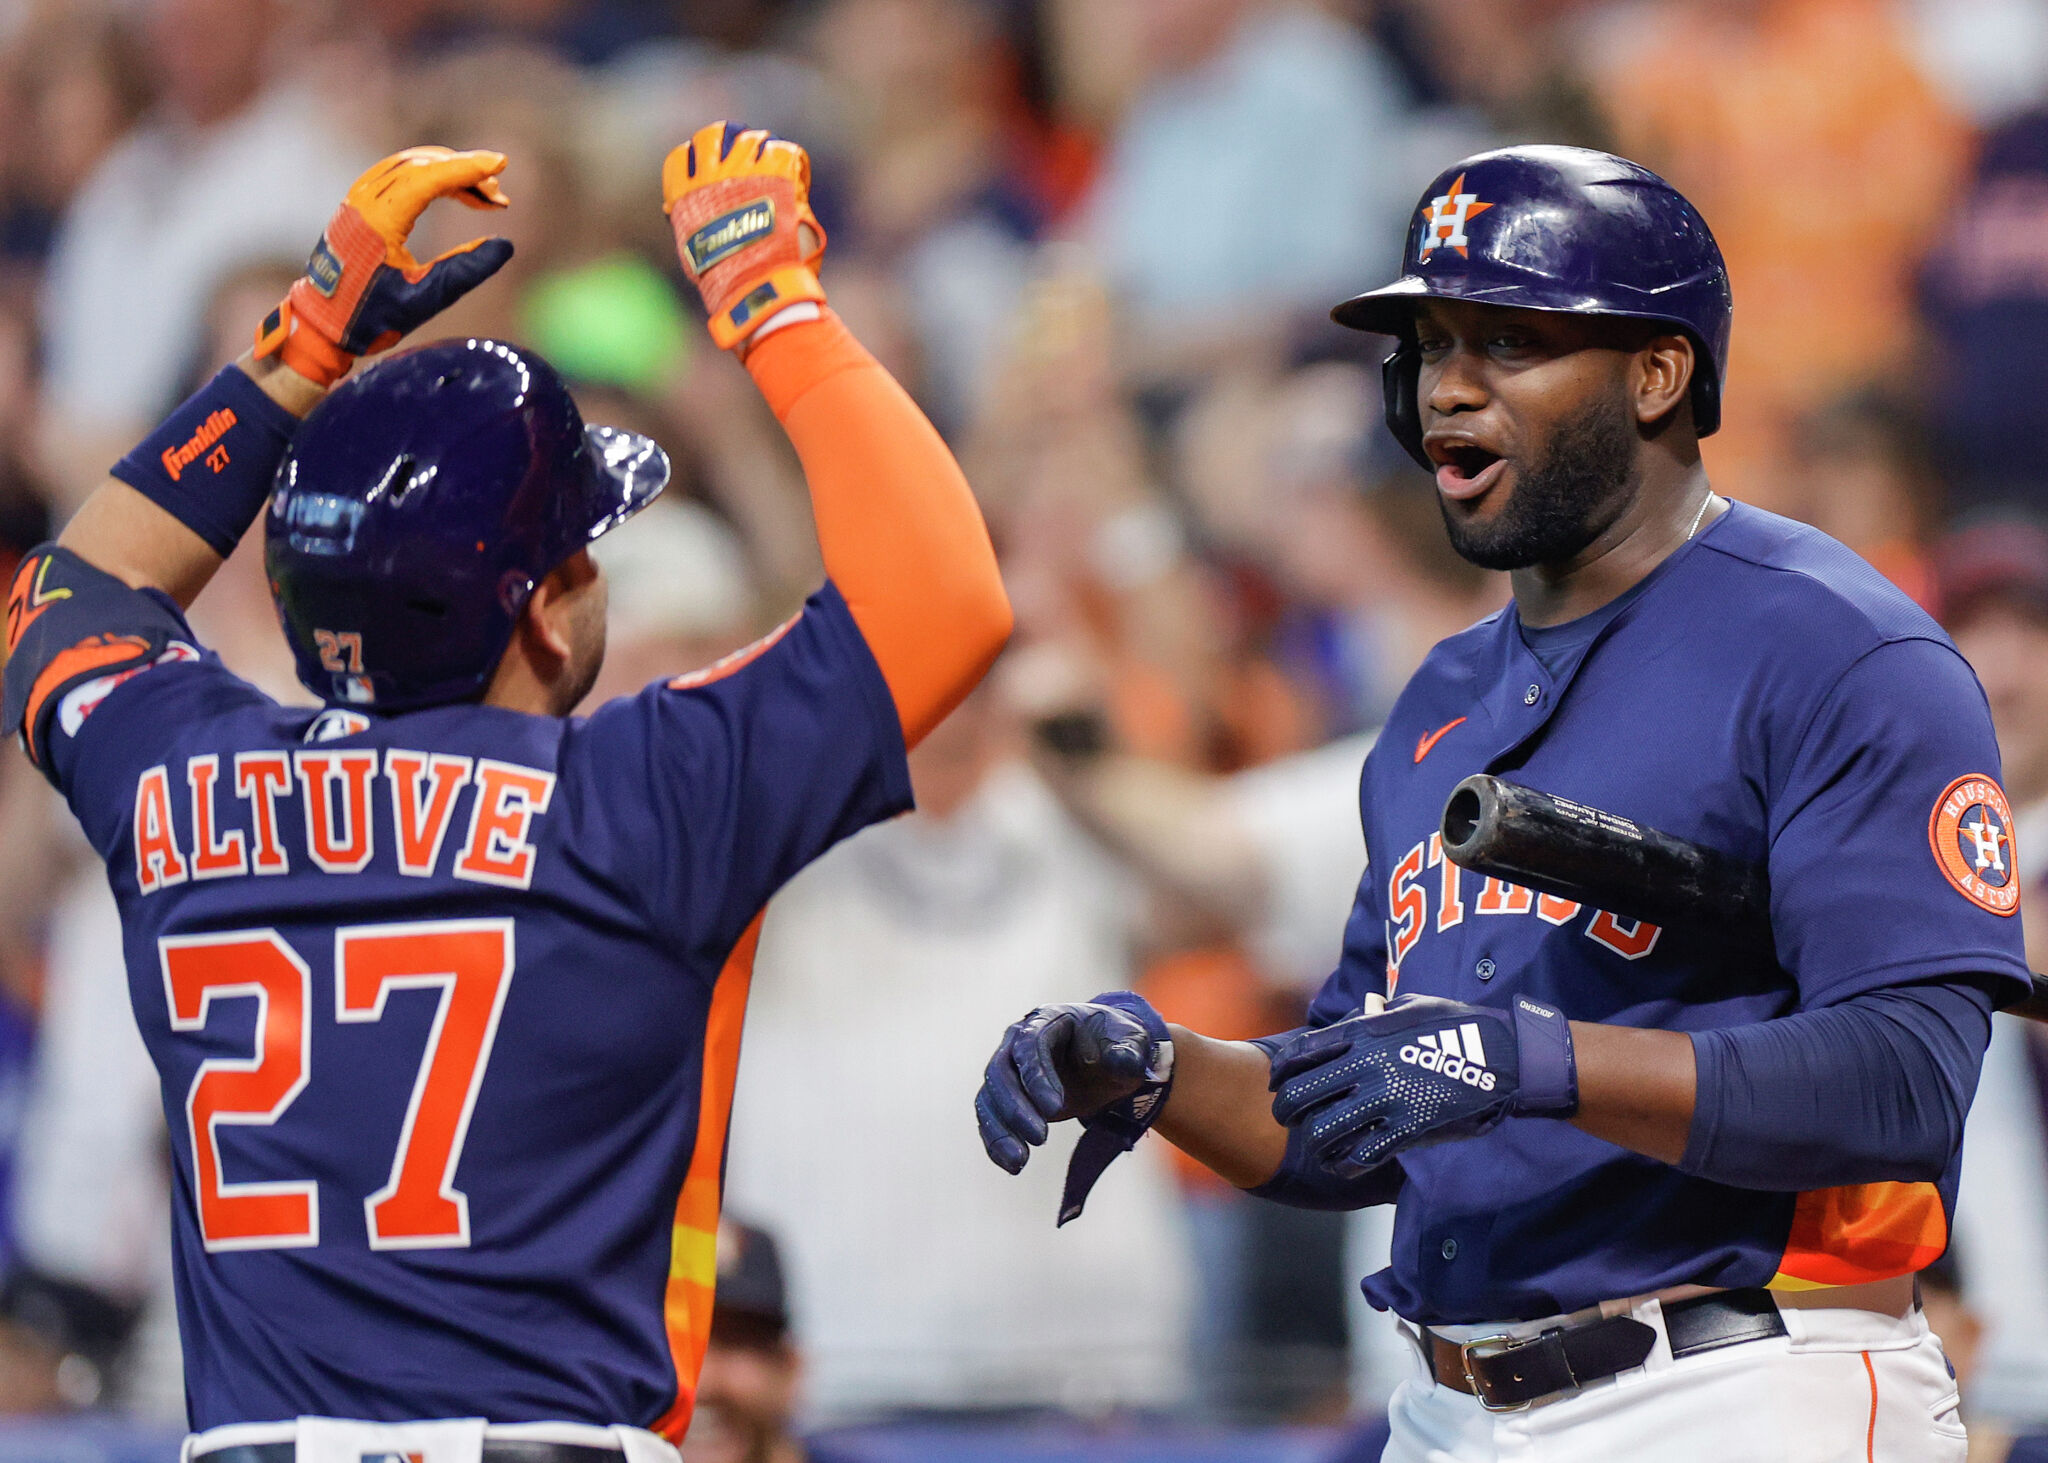 Houston Astros playoff scenarios: Here's who they could face